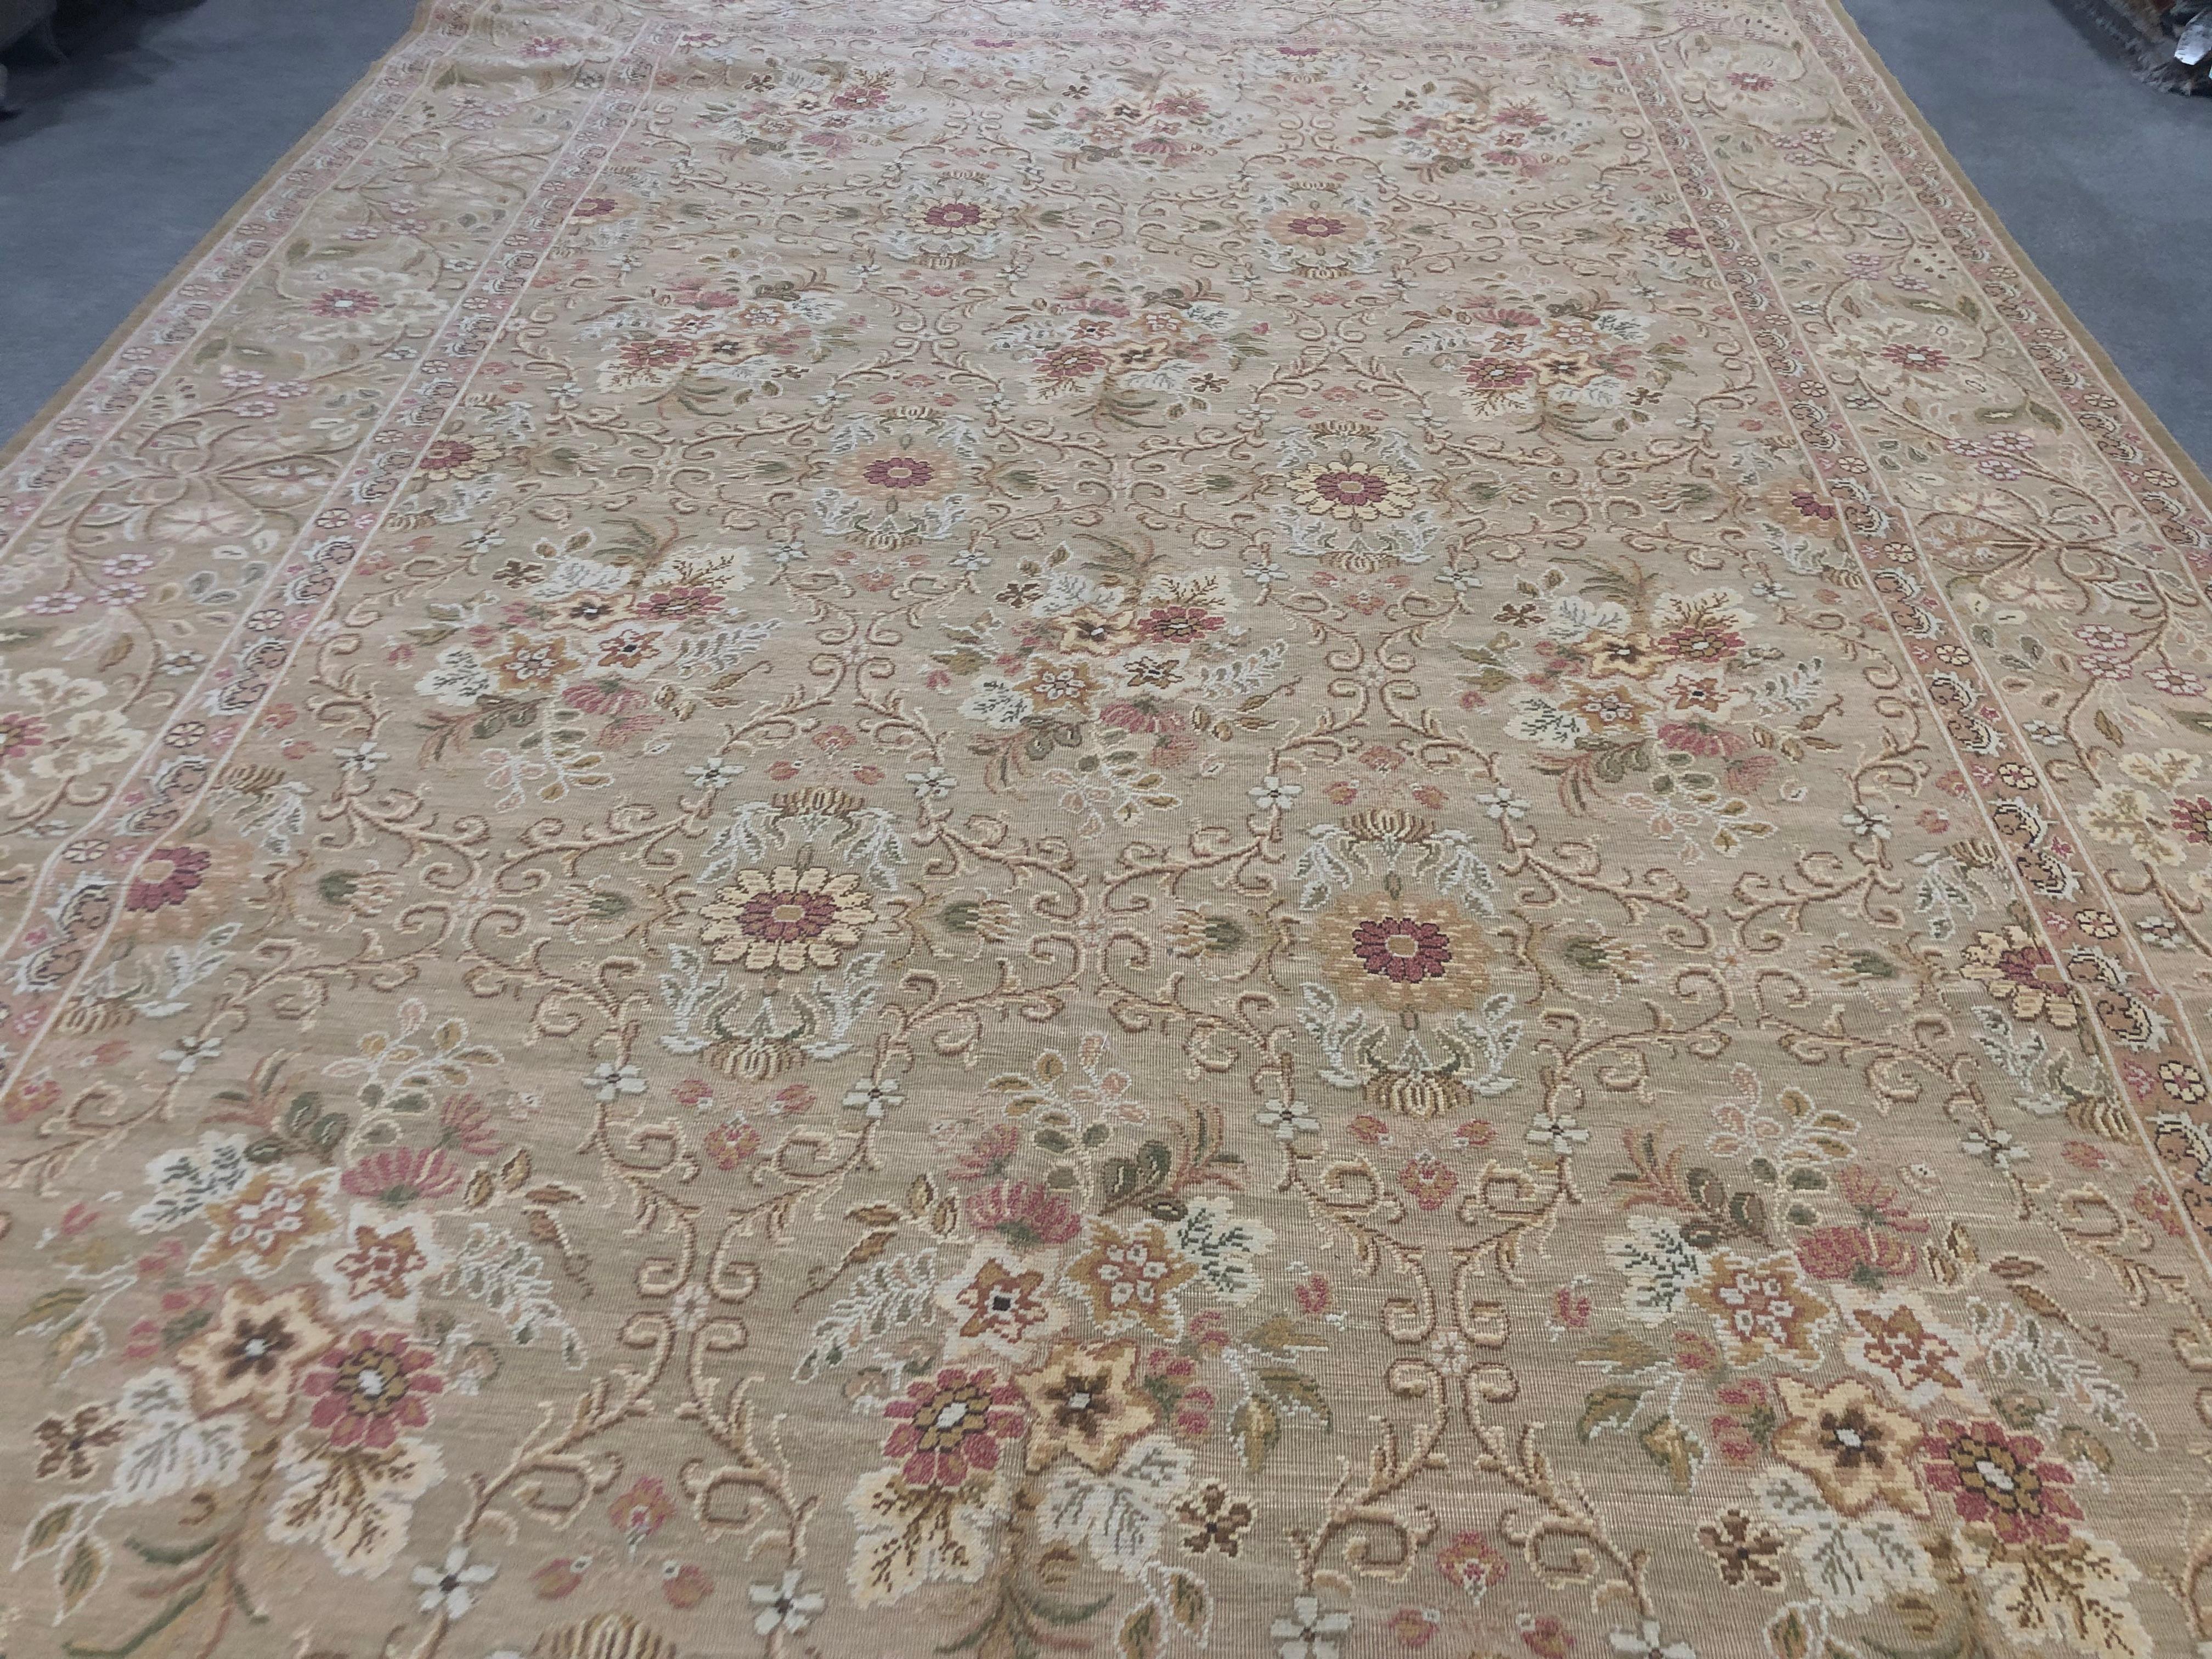 A charming wool area rug featuring pink, yellow and cream bouquets against a neutral beige background. Traditional elegance at its finest. Hand knotted. Made in Europe.